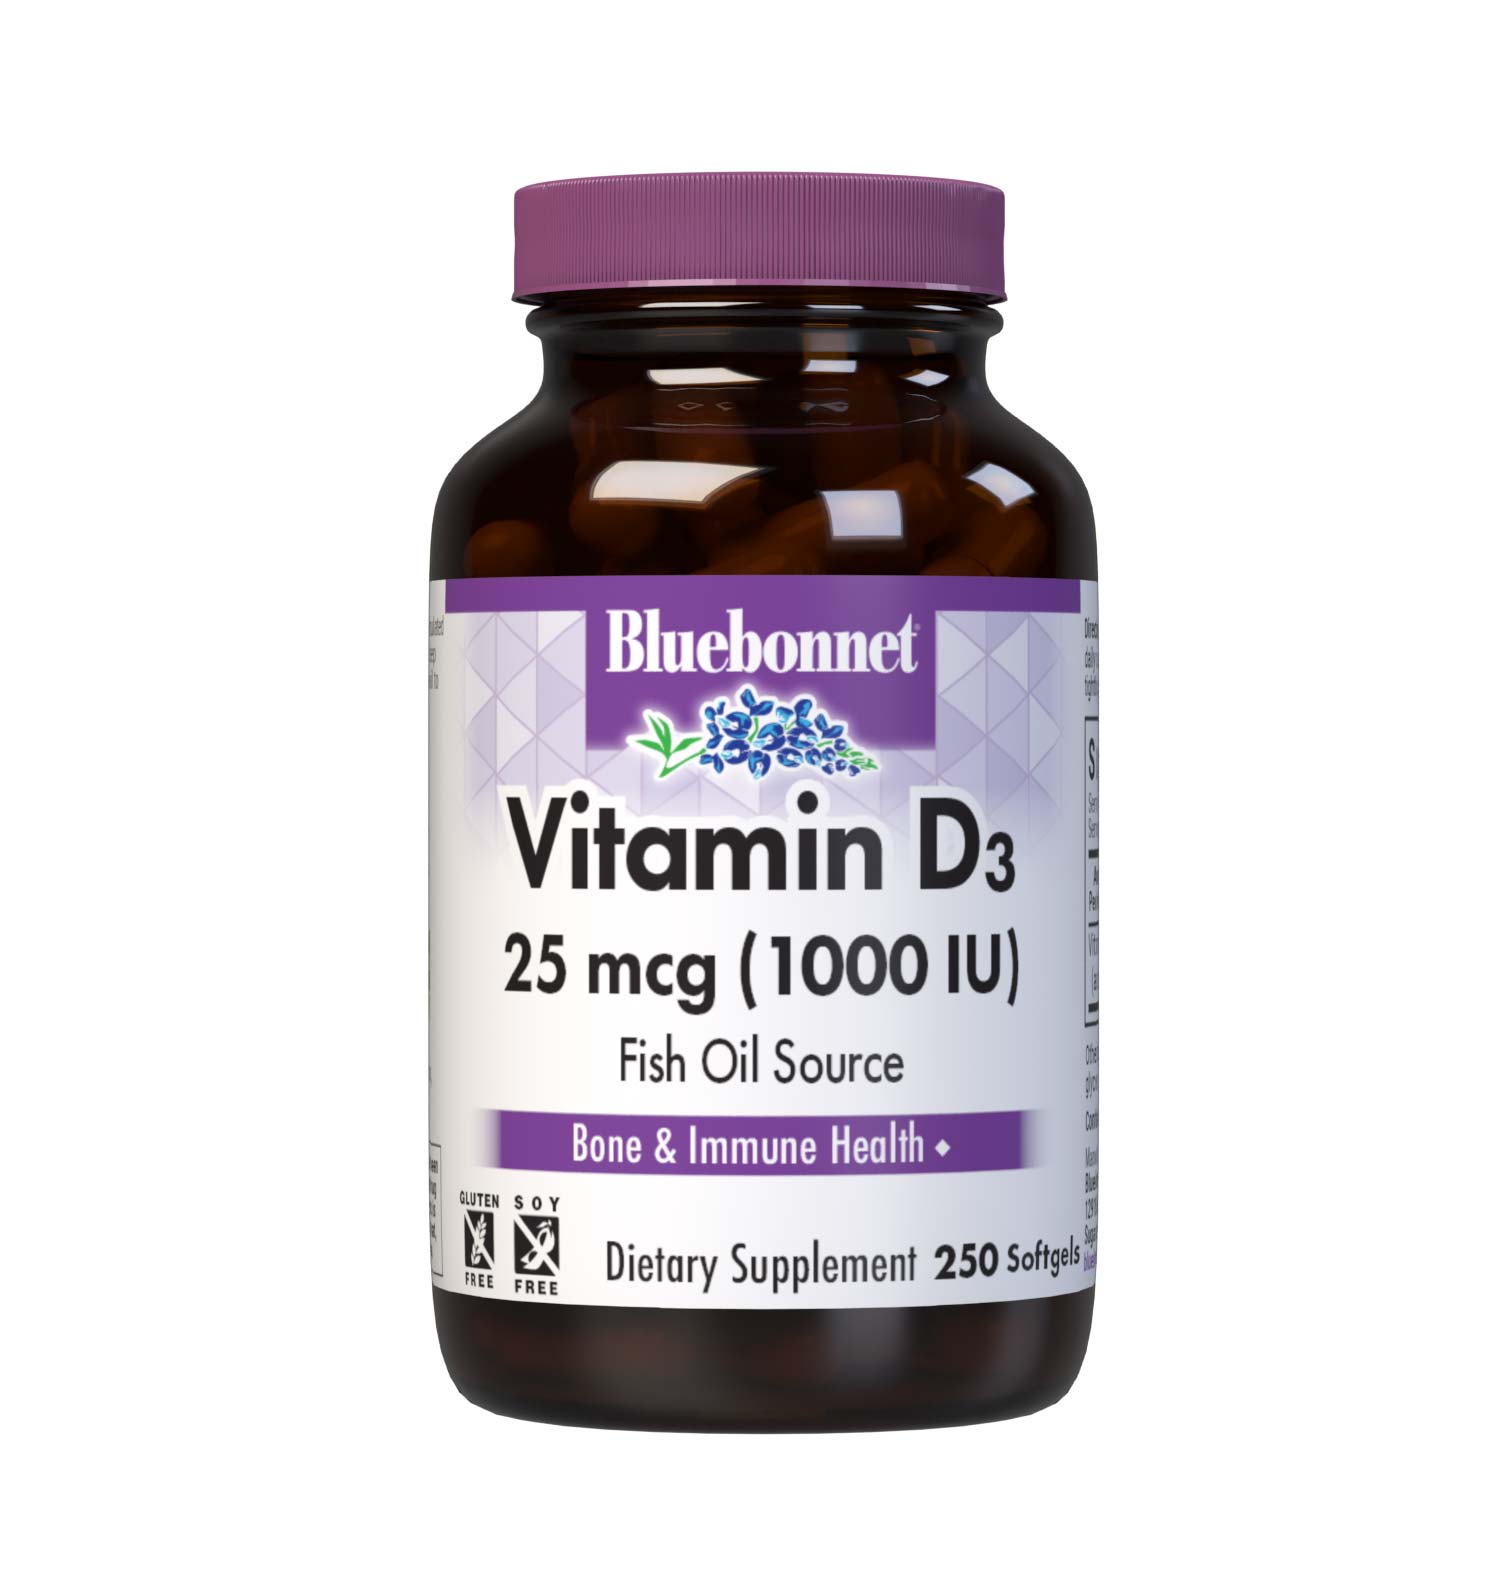 Bluebonnet’s Vitamin D3 1000 IU (25 mcg) 250 Softgels are formulated with vitamin D3 (cholecalciferol) that supports strong healthy bones and immune function from molecularly distilled, deep sea, cold water, fish liver oil in a base of non-GMO safflower oil. #size_250 count